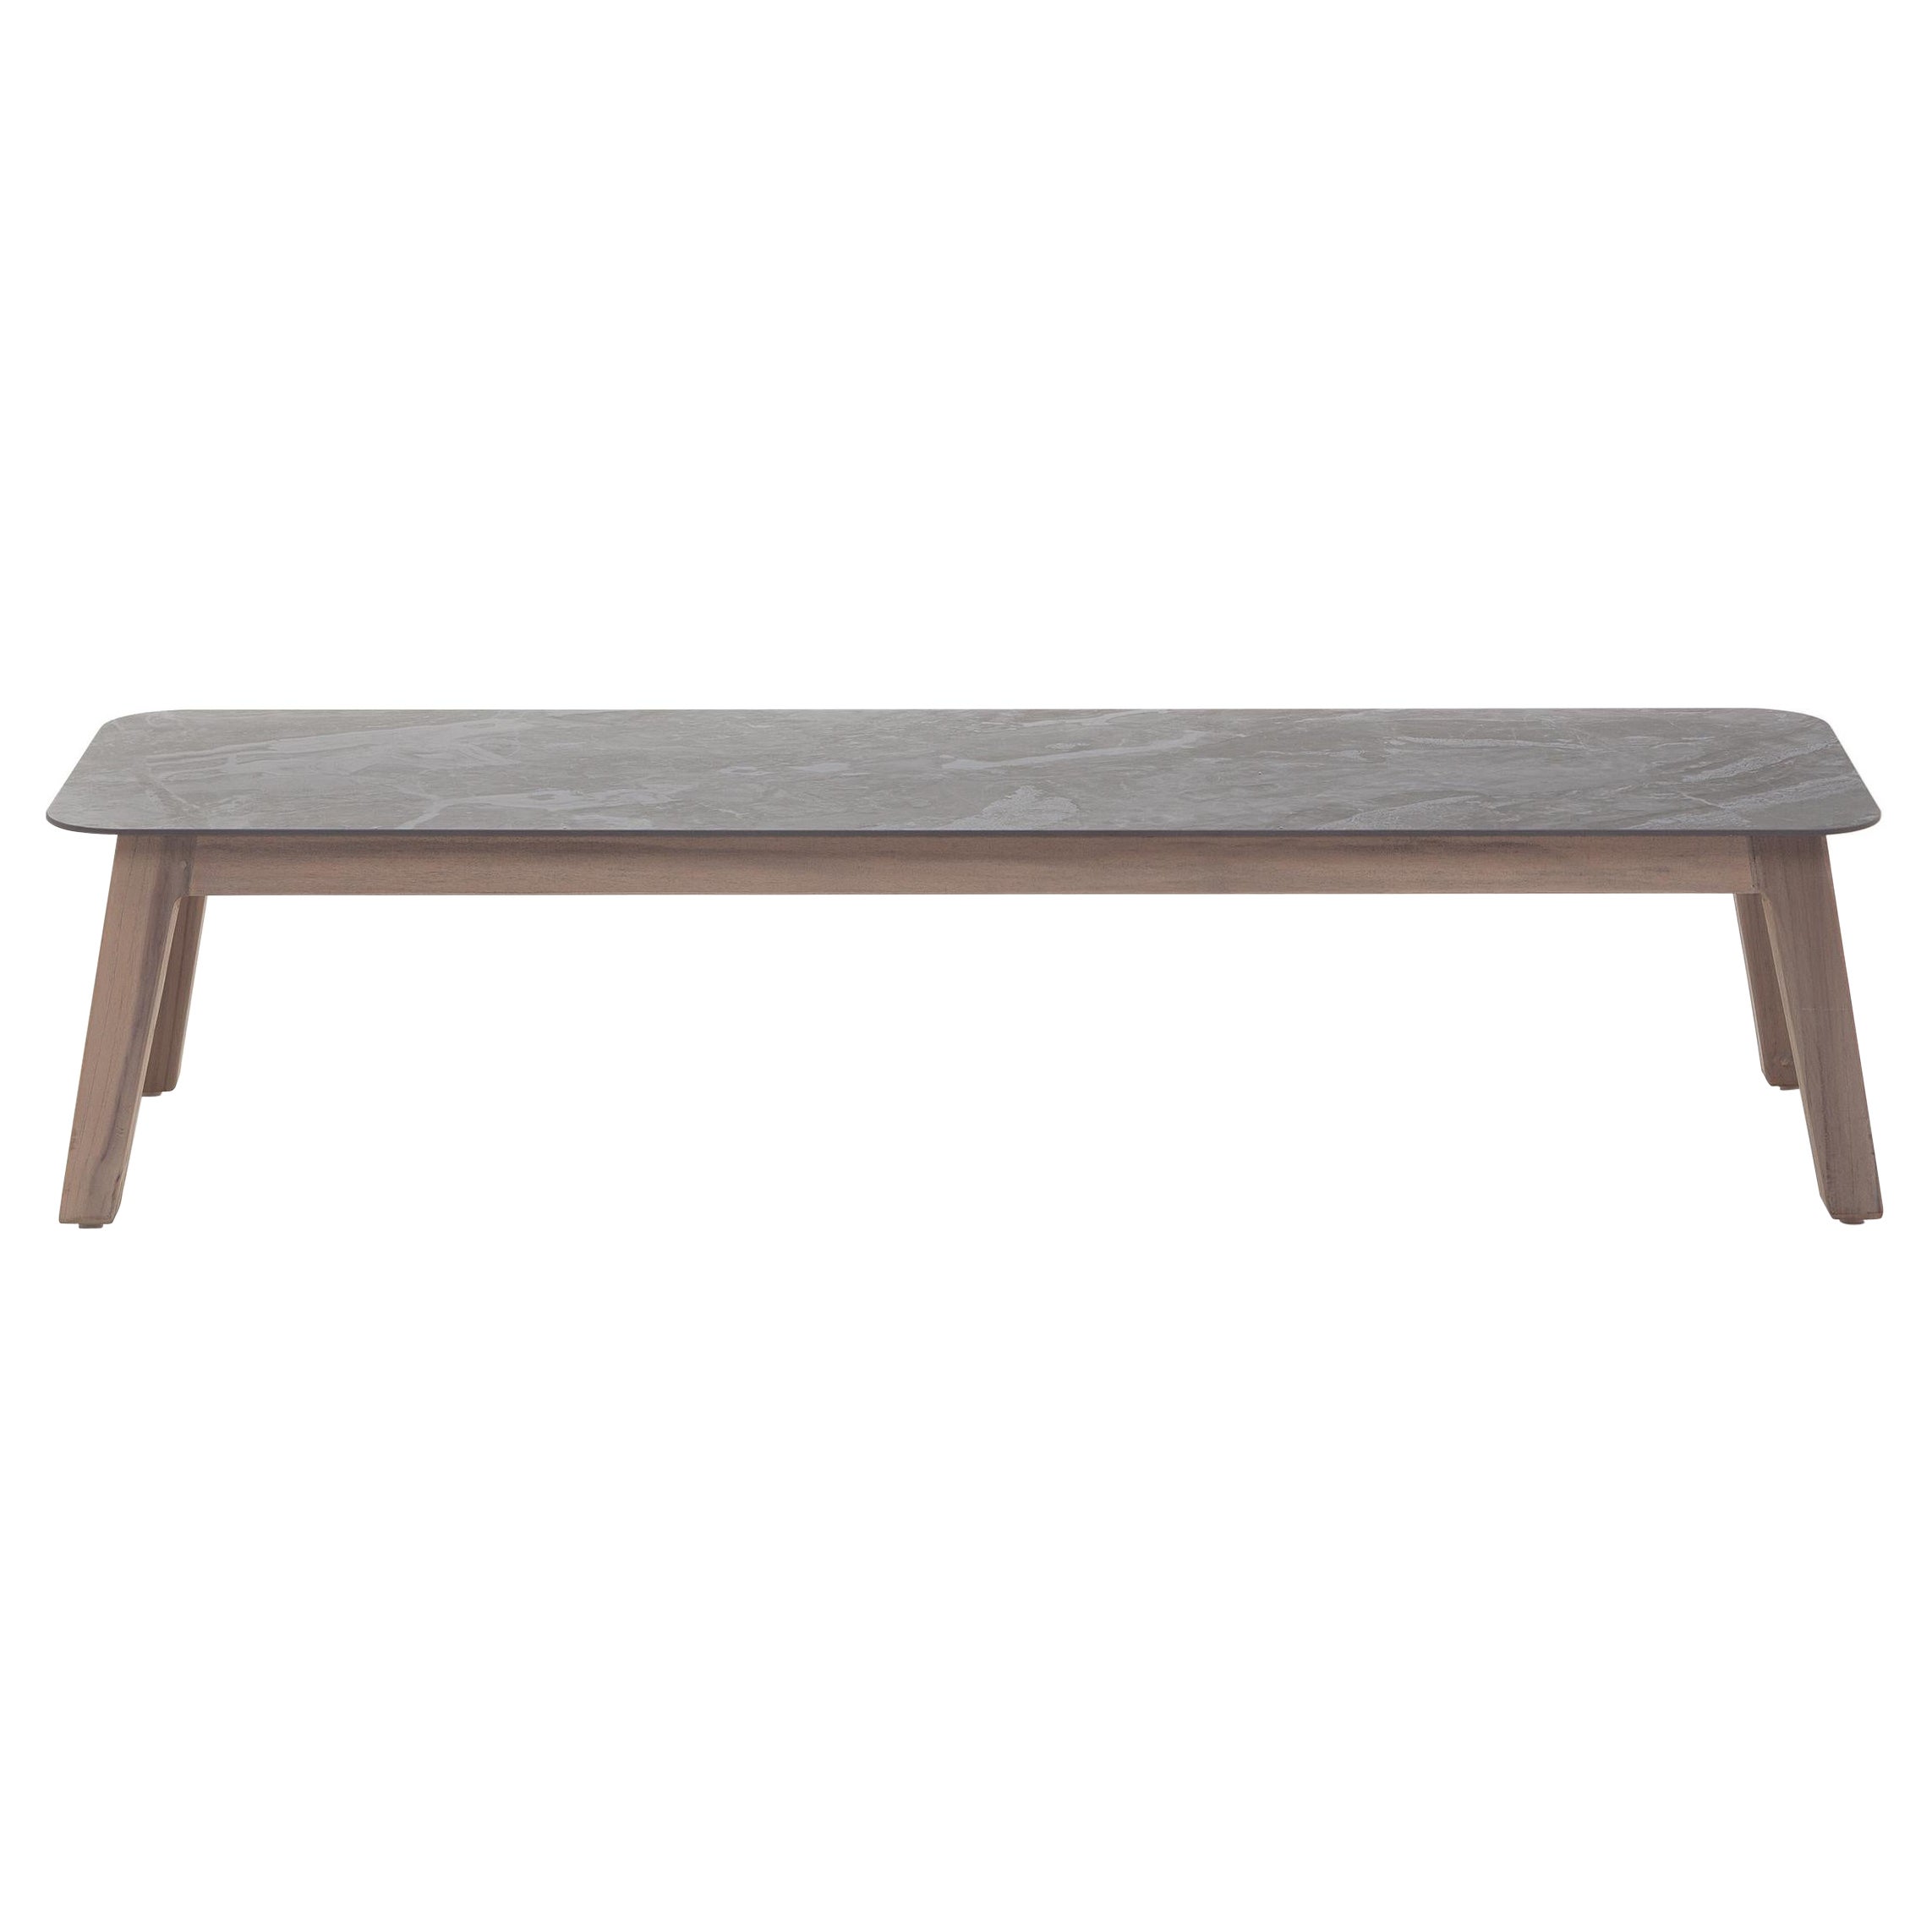 Gervasoni Inout 867 Coffee Table in Grey Porcelain Stoneware Top and Washed Teak For Sale